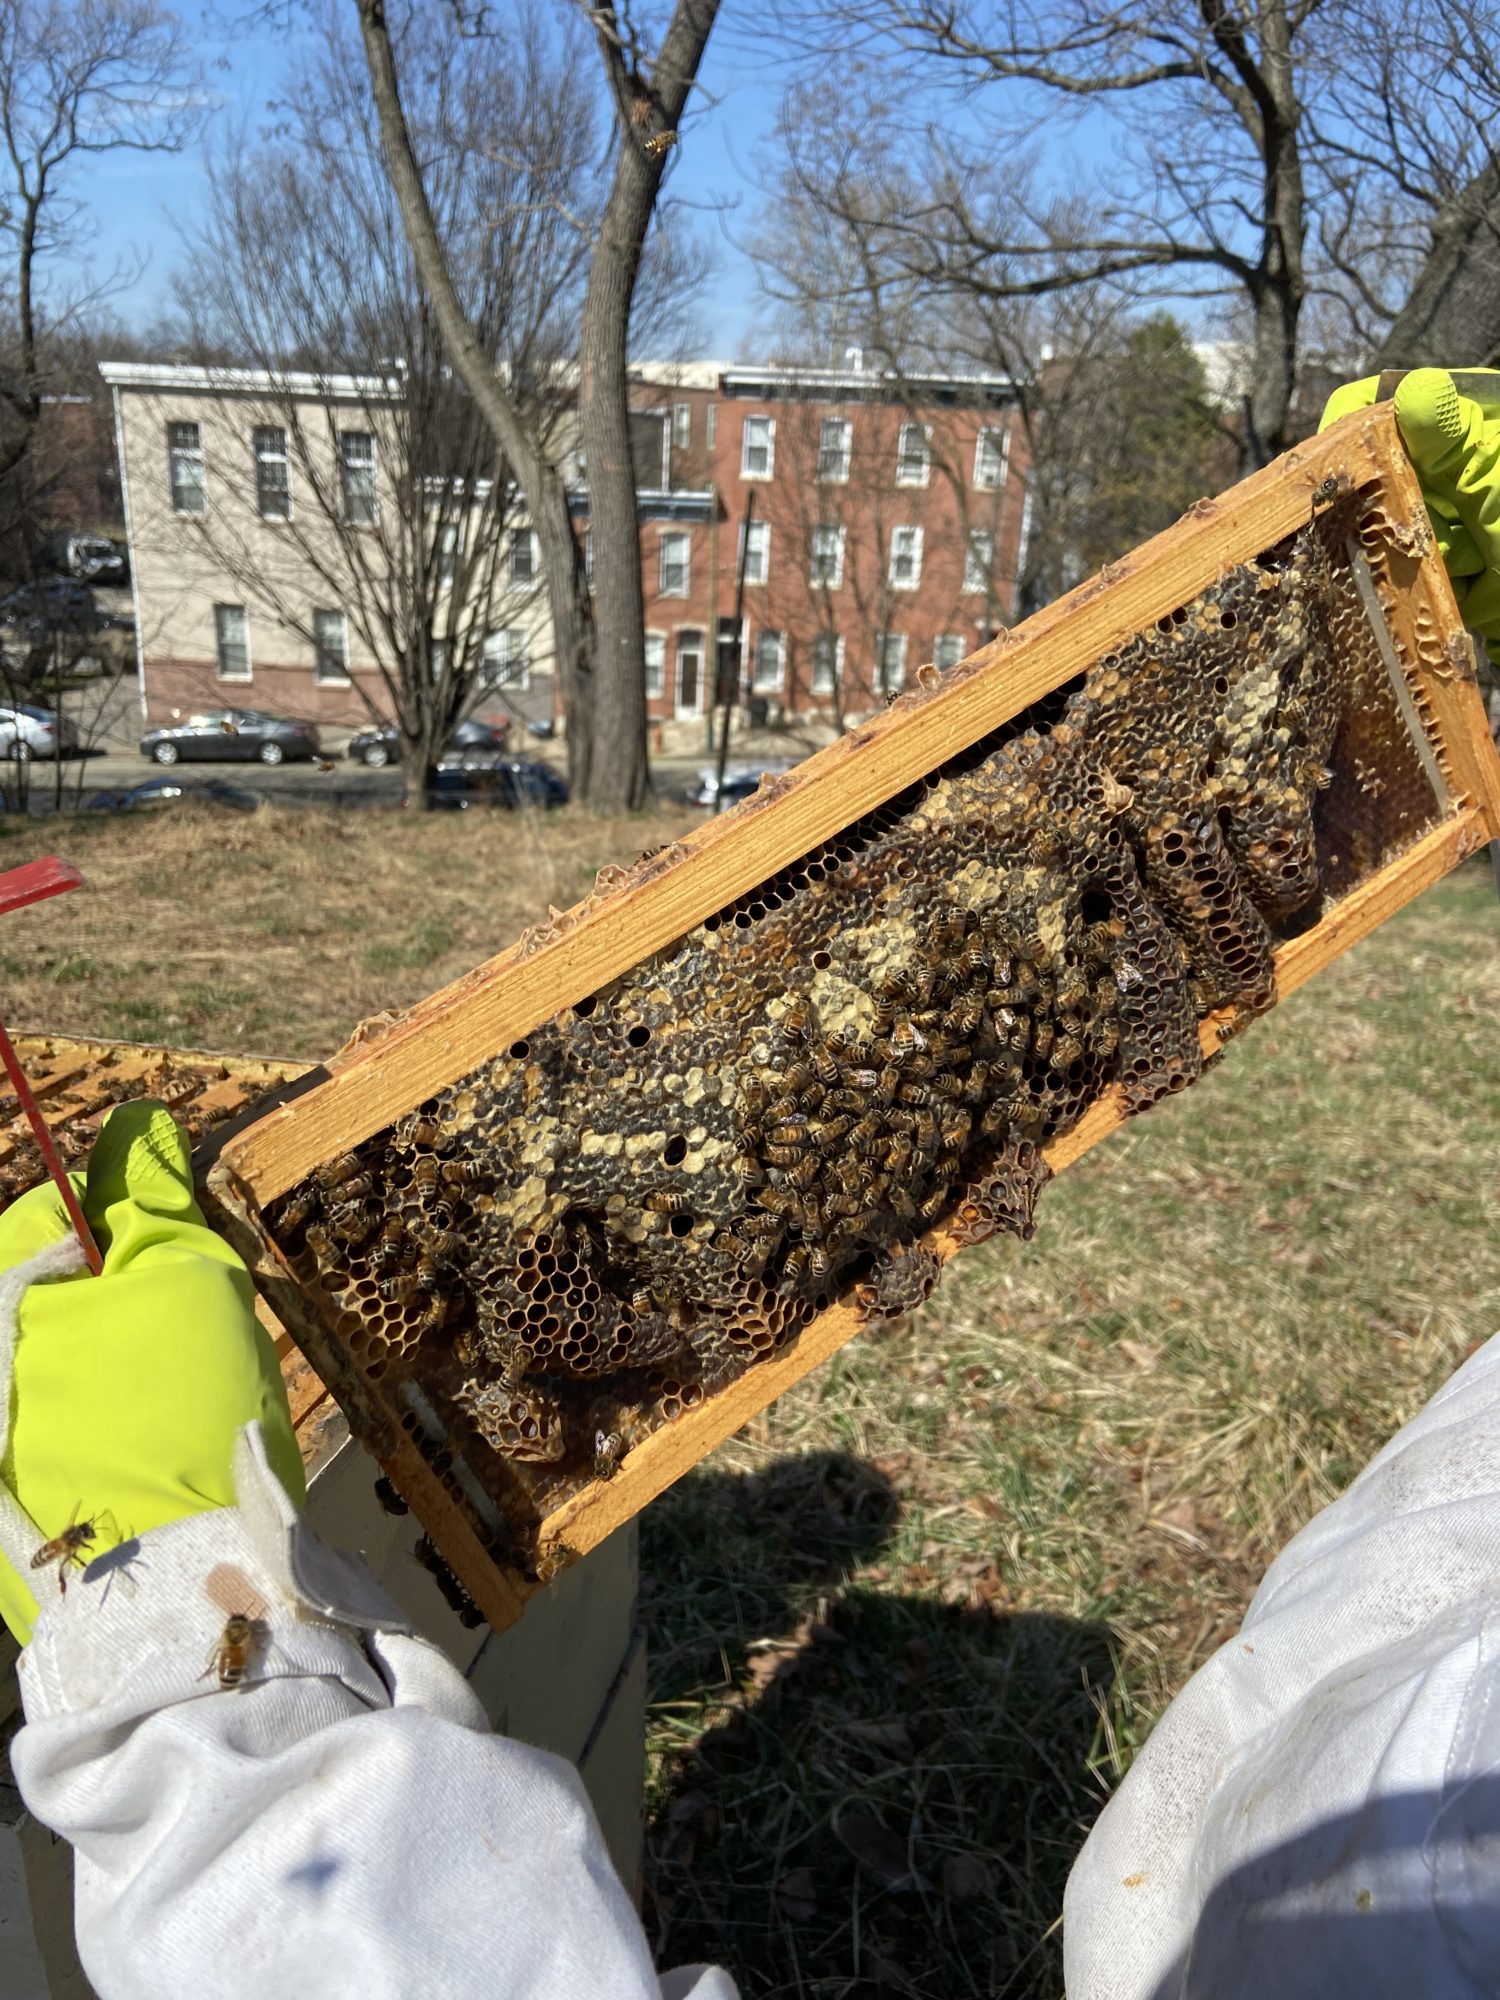 A person in a bee suit wearing bright yellow golves holds a frame from a beehive covered in honeycomb and crawling with bees. The trees in the background are still bare of leaves. Row homes line the street in the background.